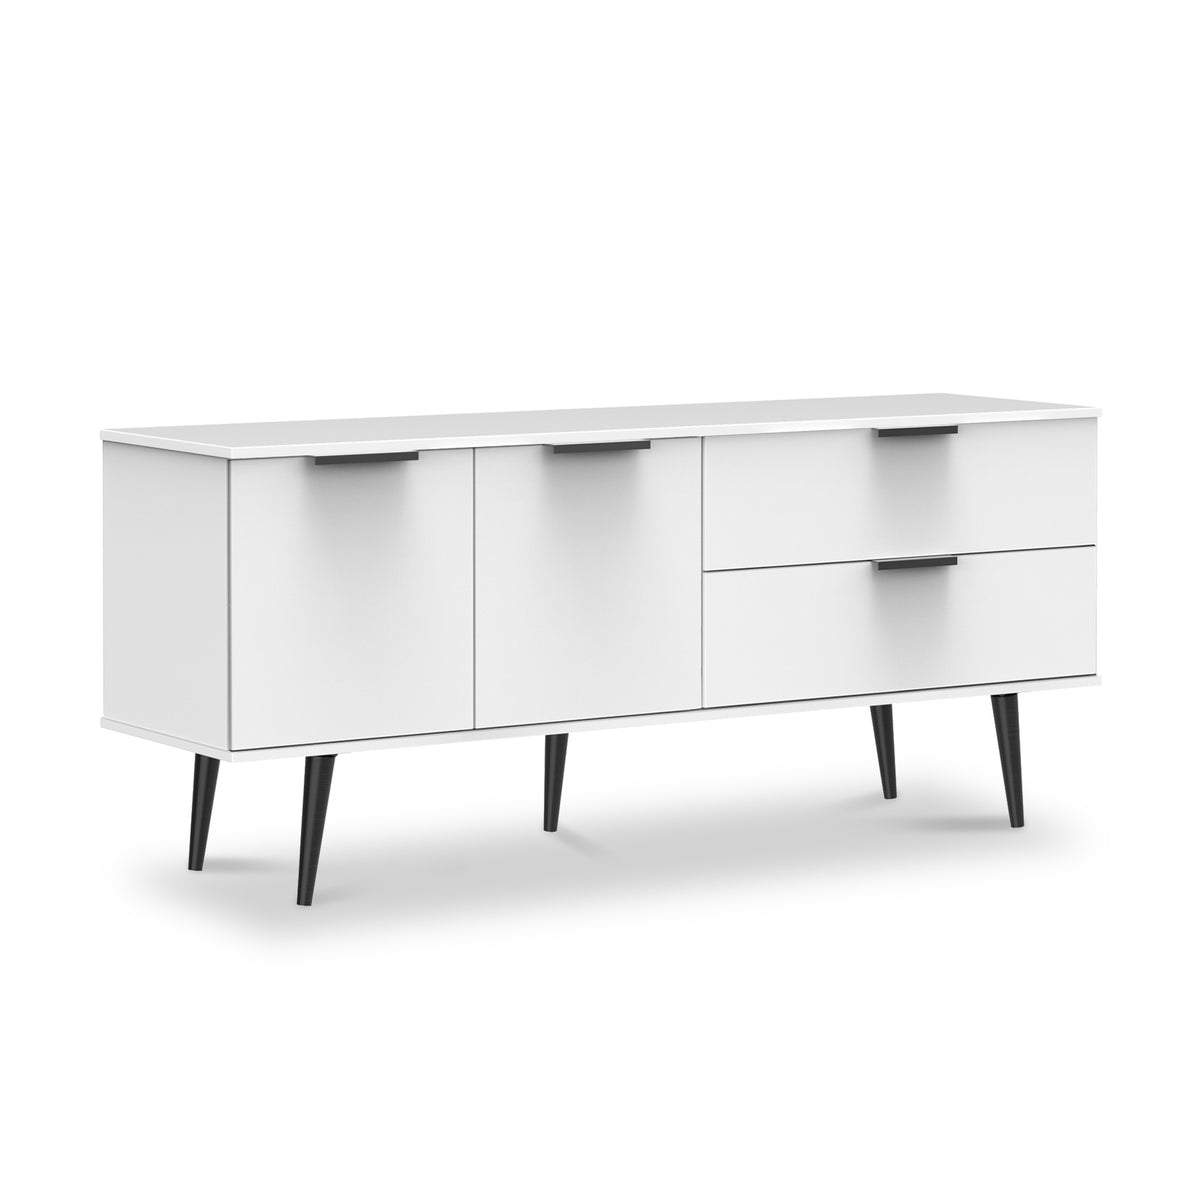 Asher White 2 Drawer 2 Door Wide Sideboard from Roseland Furniture